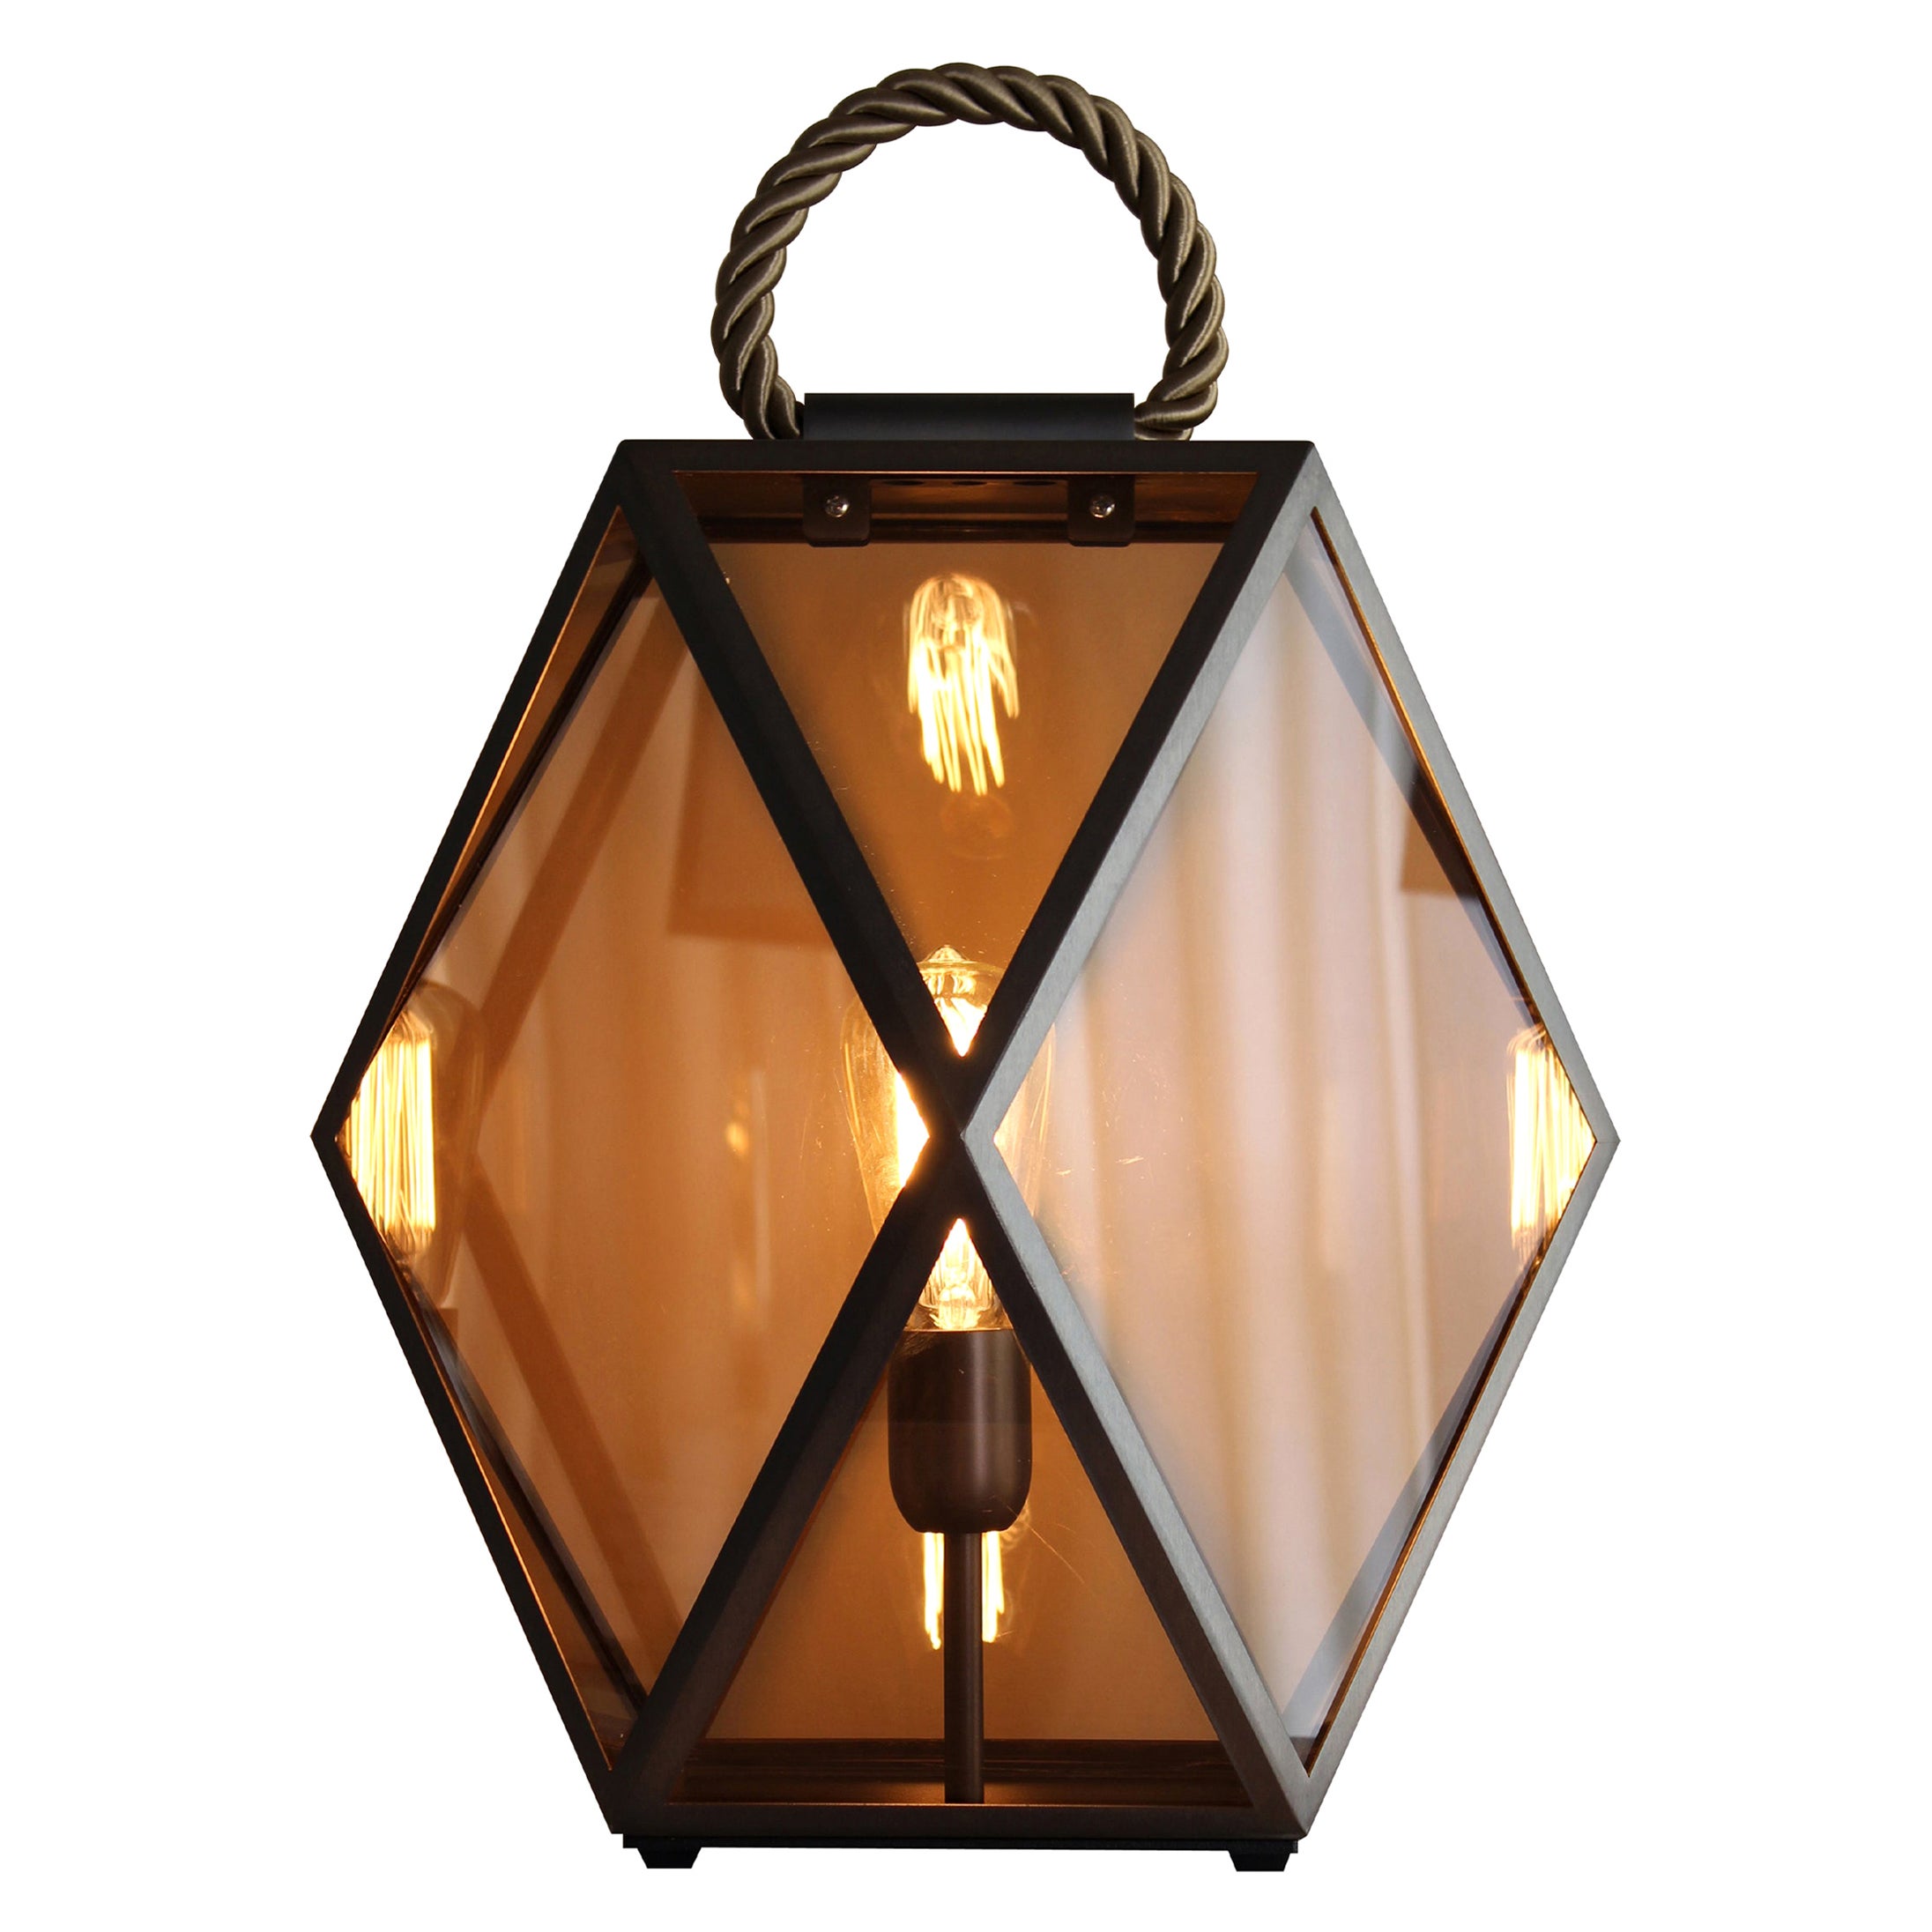 Muse Lantern Medium Lamp in Satin Bronze Structure, Honey-Silk Handle, and Amber For Sale